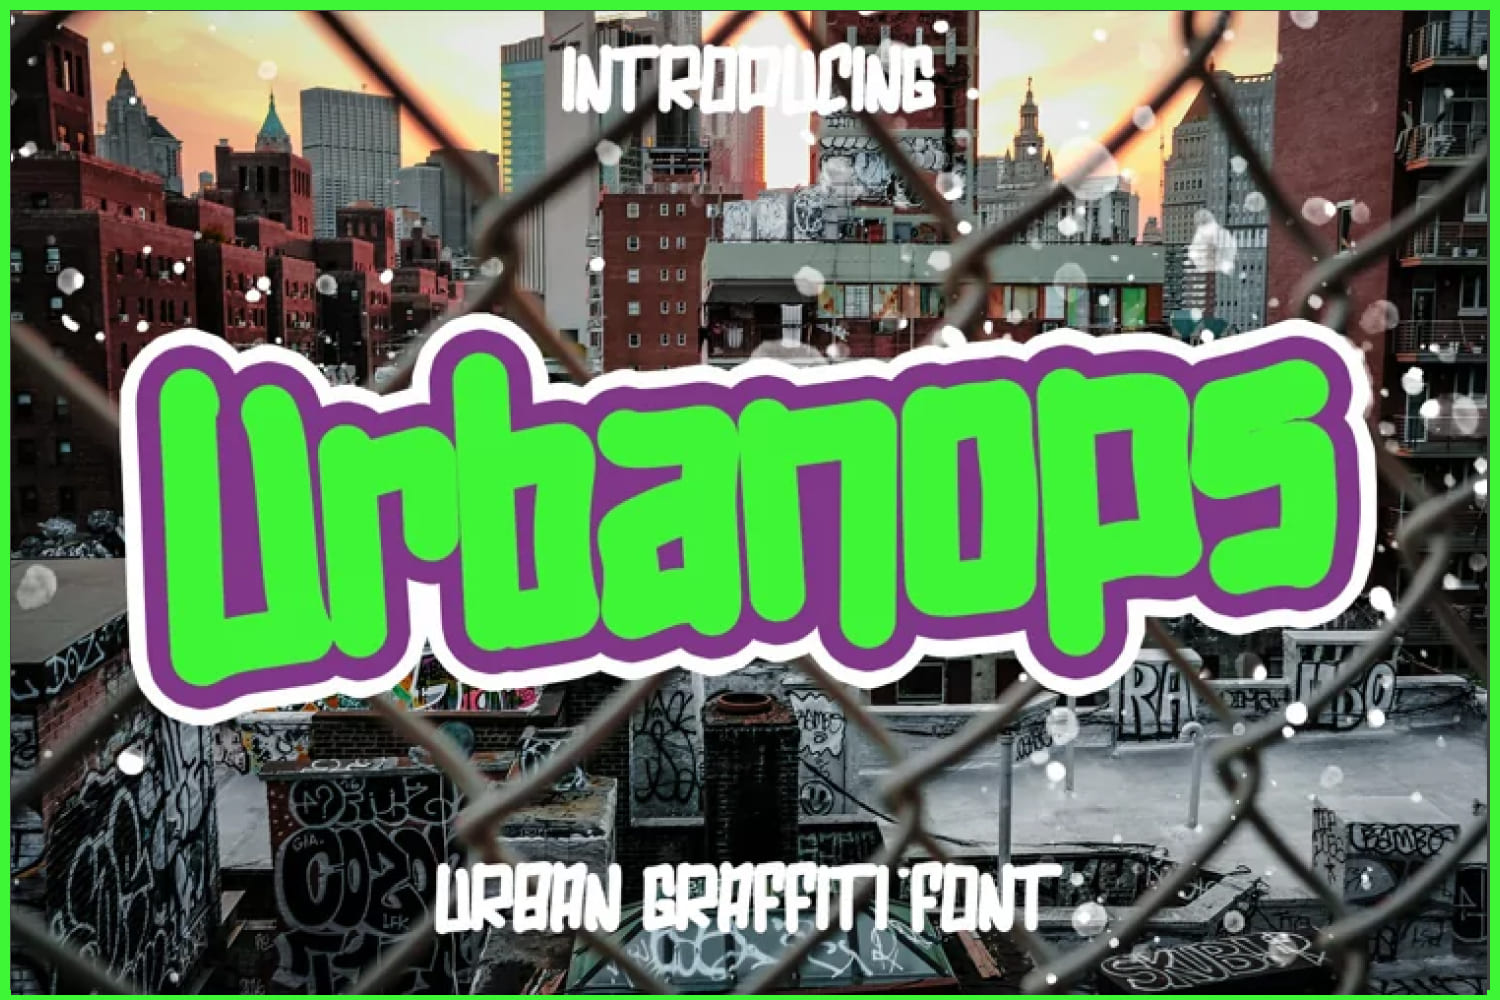 Graffiti style text in green and purple color on the background of the photo of the city.